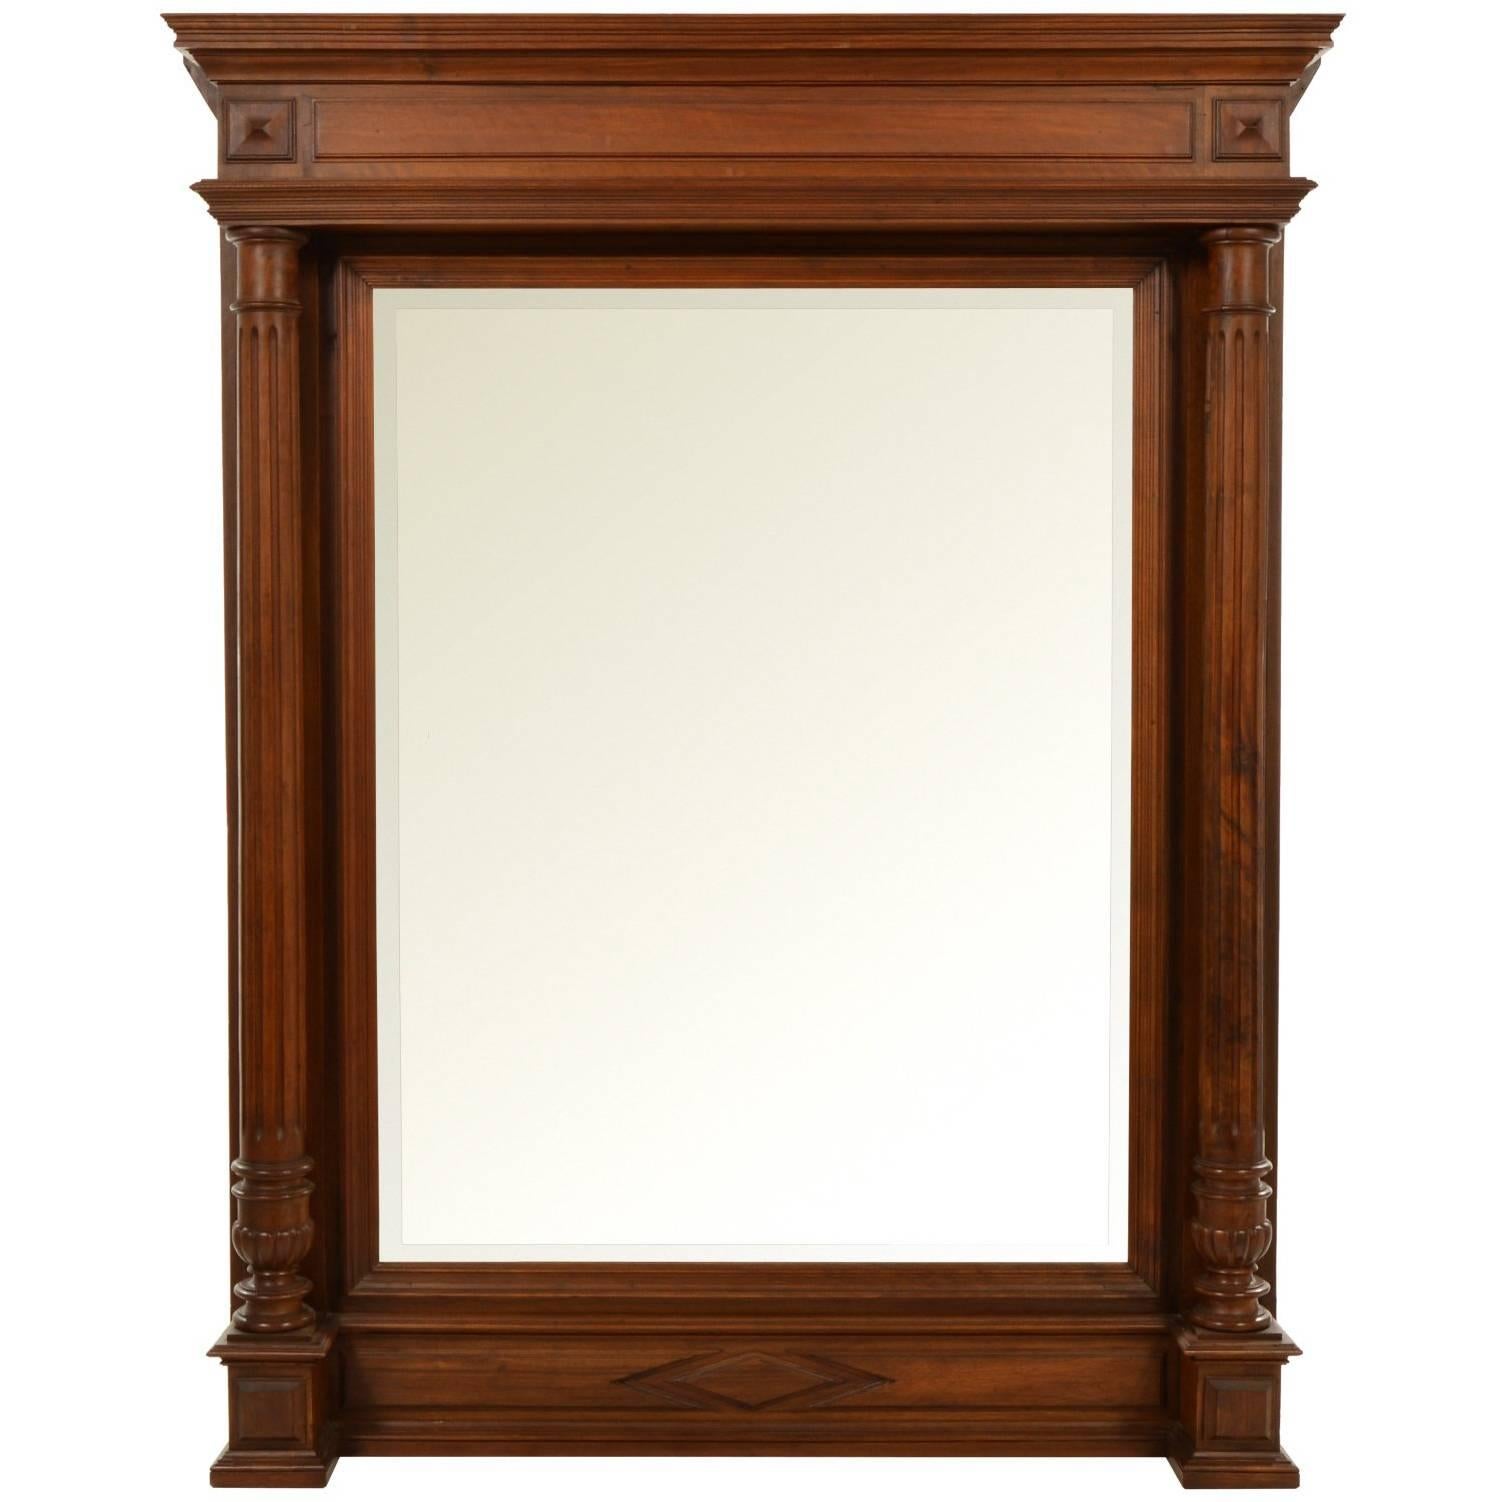 19th Century French Bevelled Wall or Overmantel Mirror with Walnut Frame For Sale